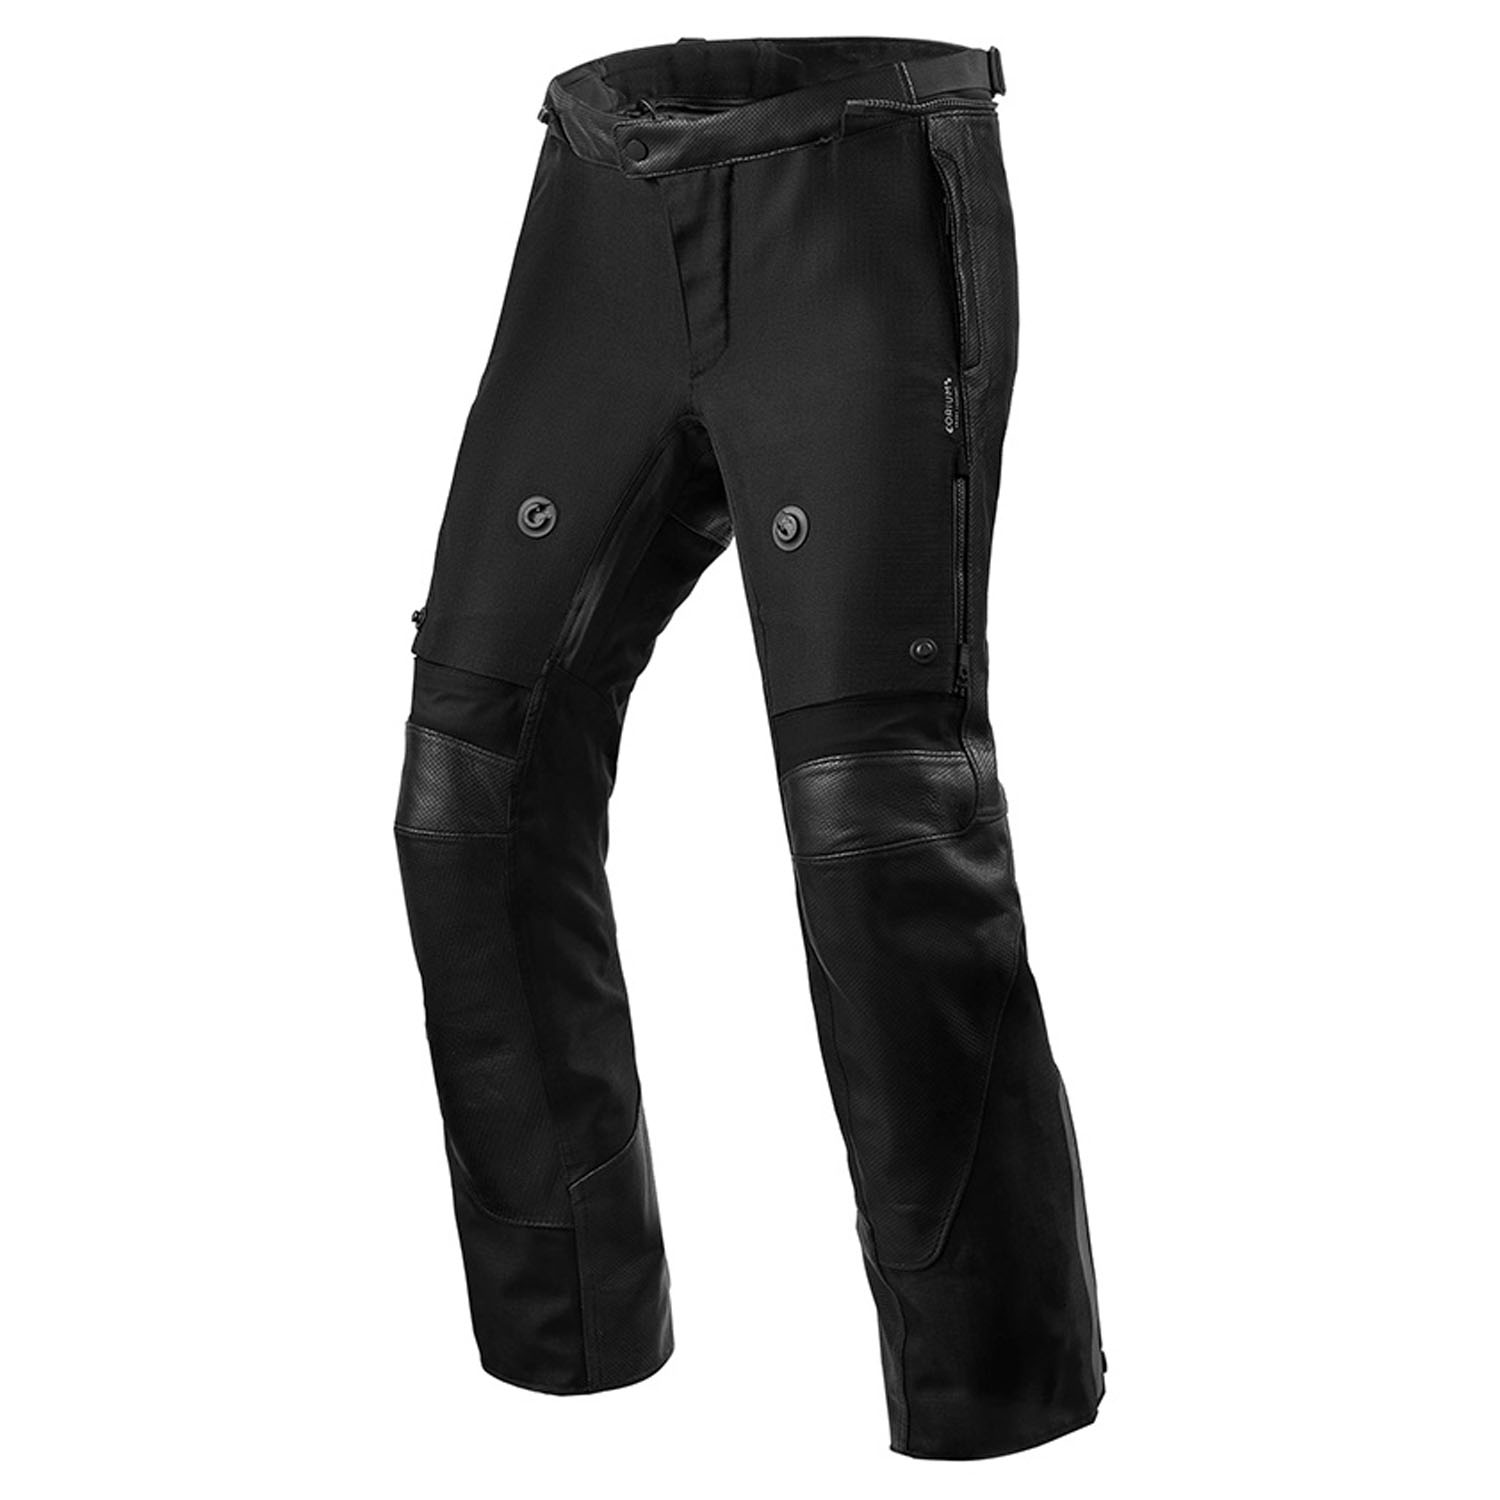 Image of REV'IT! Trousers Valve H2O Black Standard Motorcycle Pants Size 48 ID 8700001315791